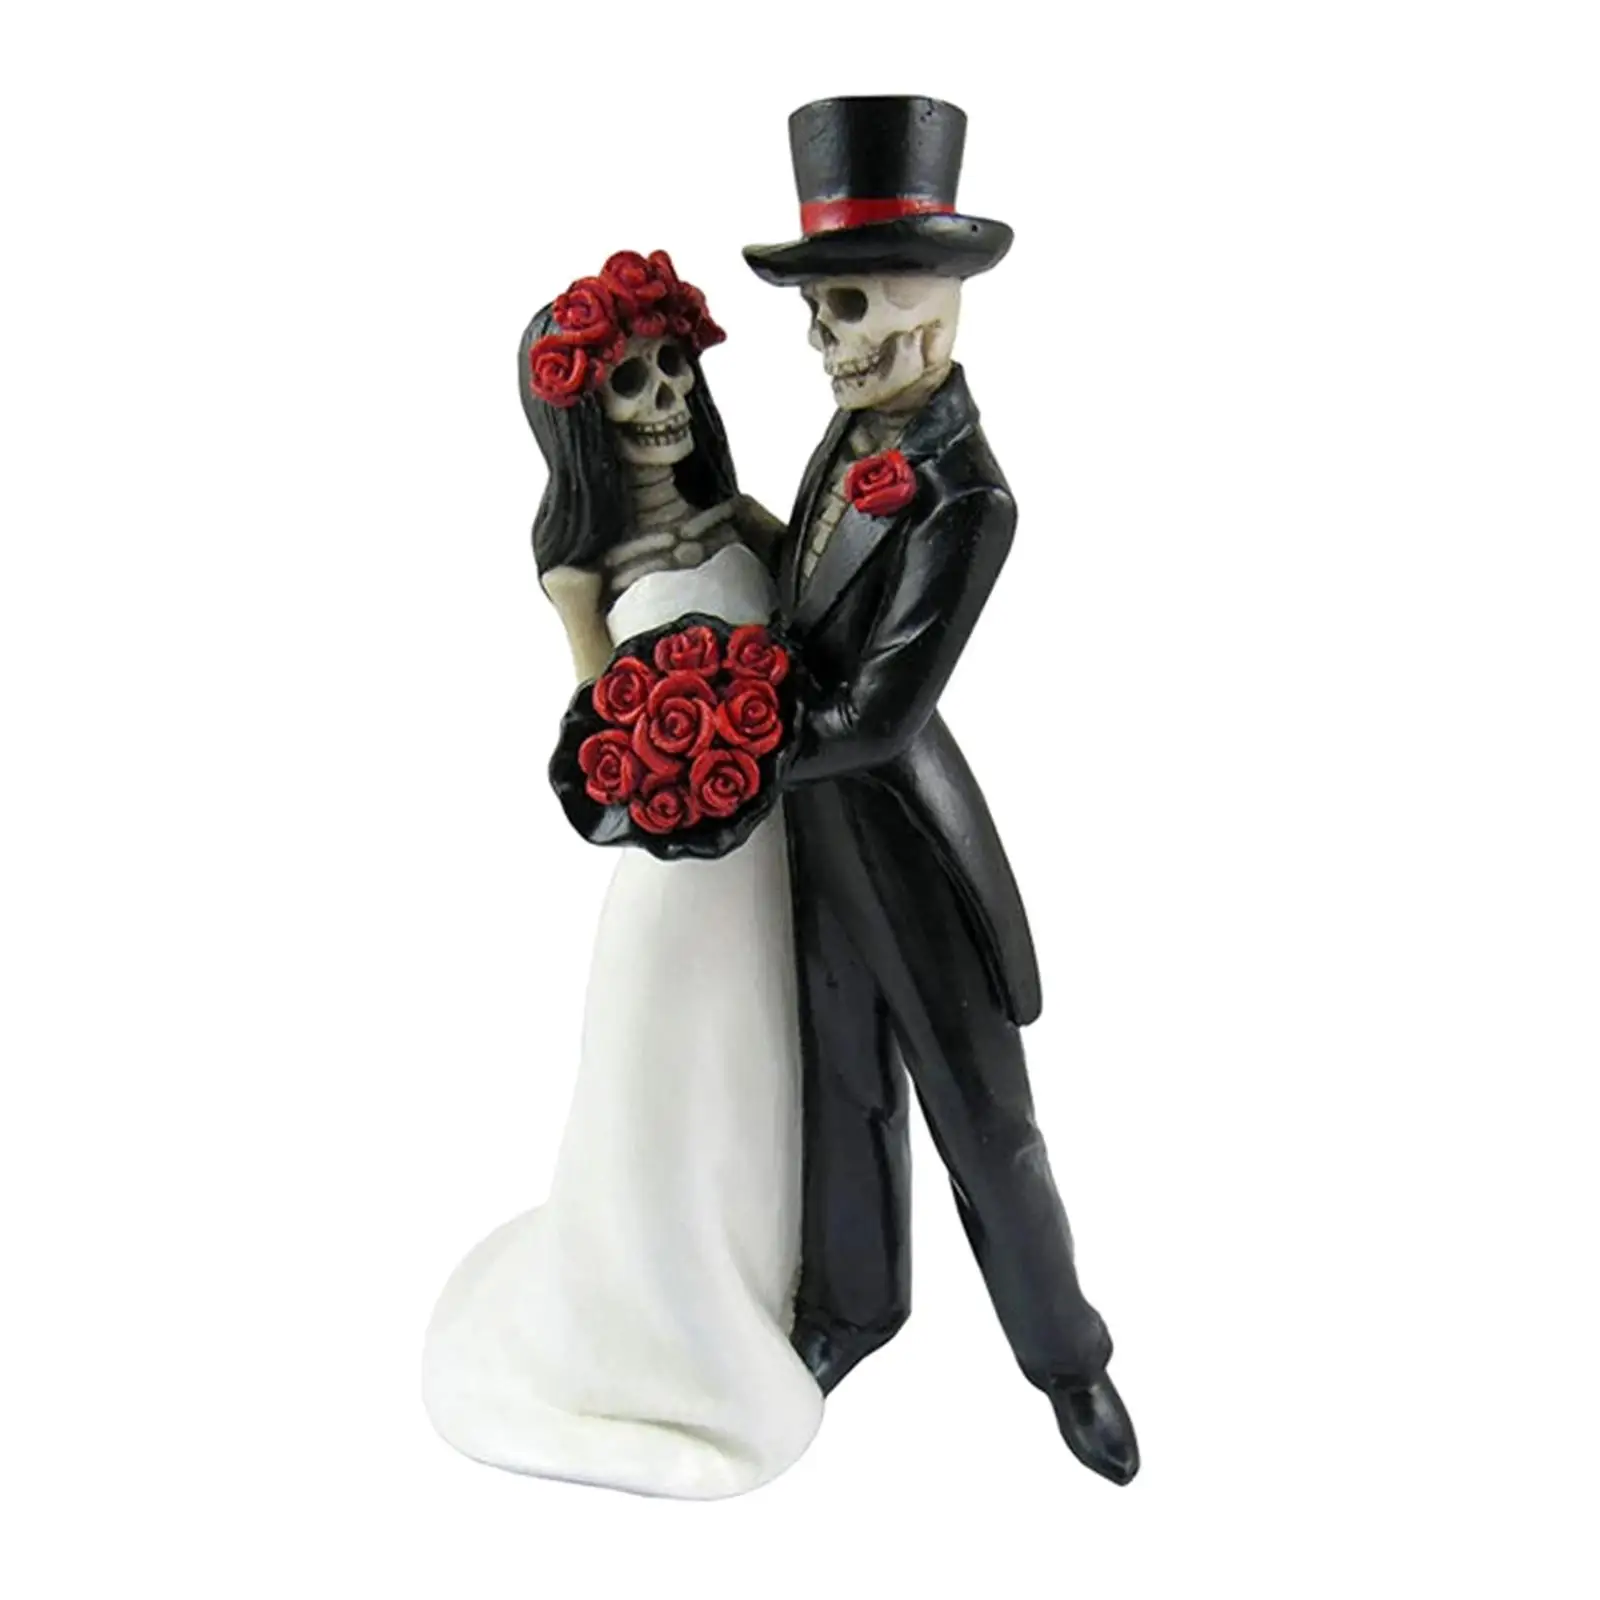 Resin Skeleton couple Skull Ornaments Art Figurine bride Crafts Collectible for Yard Birthday Living Room Home Decor Garden